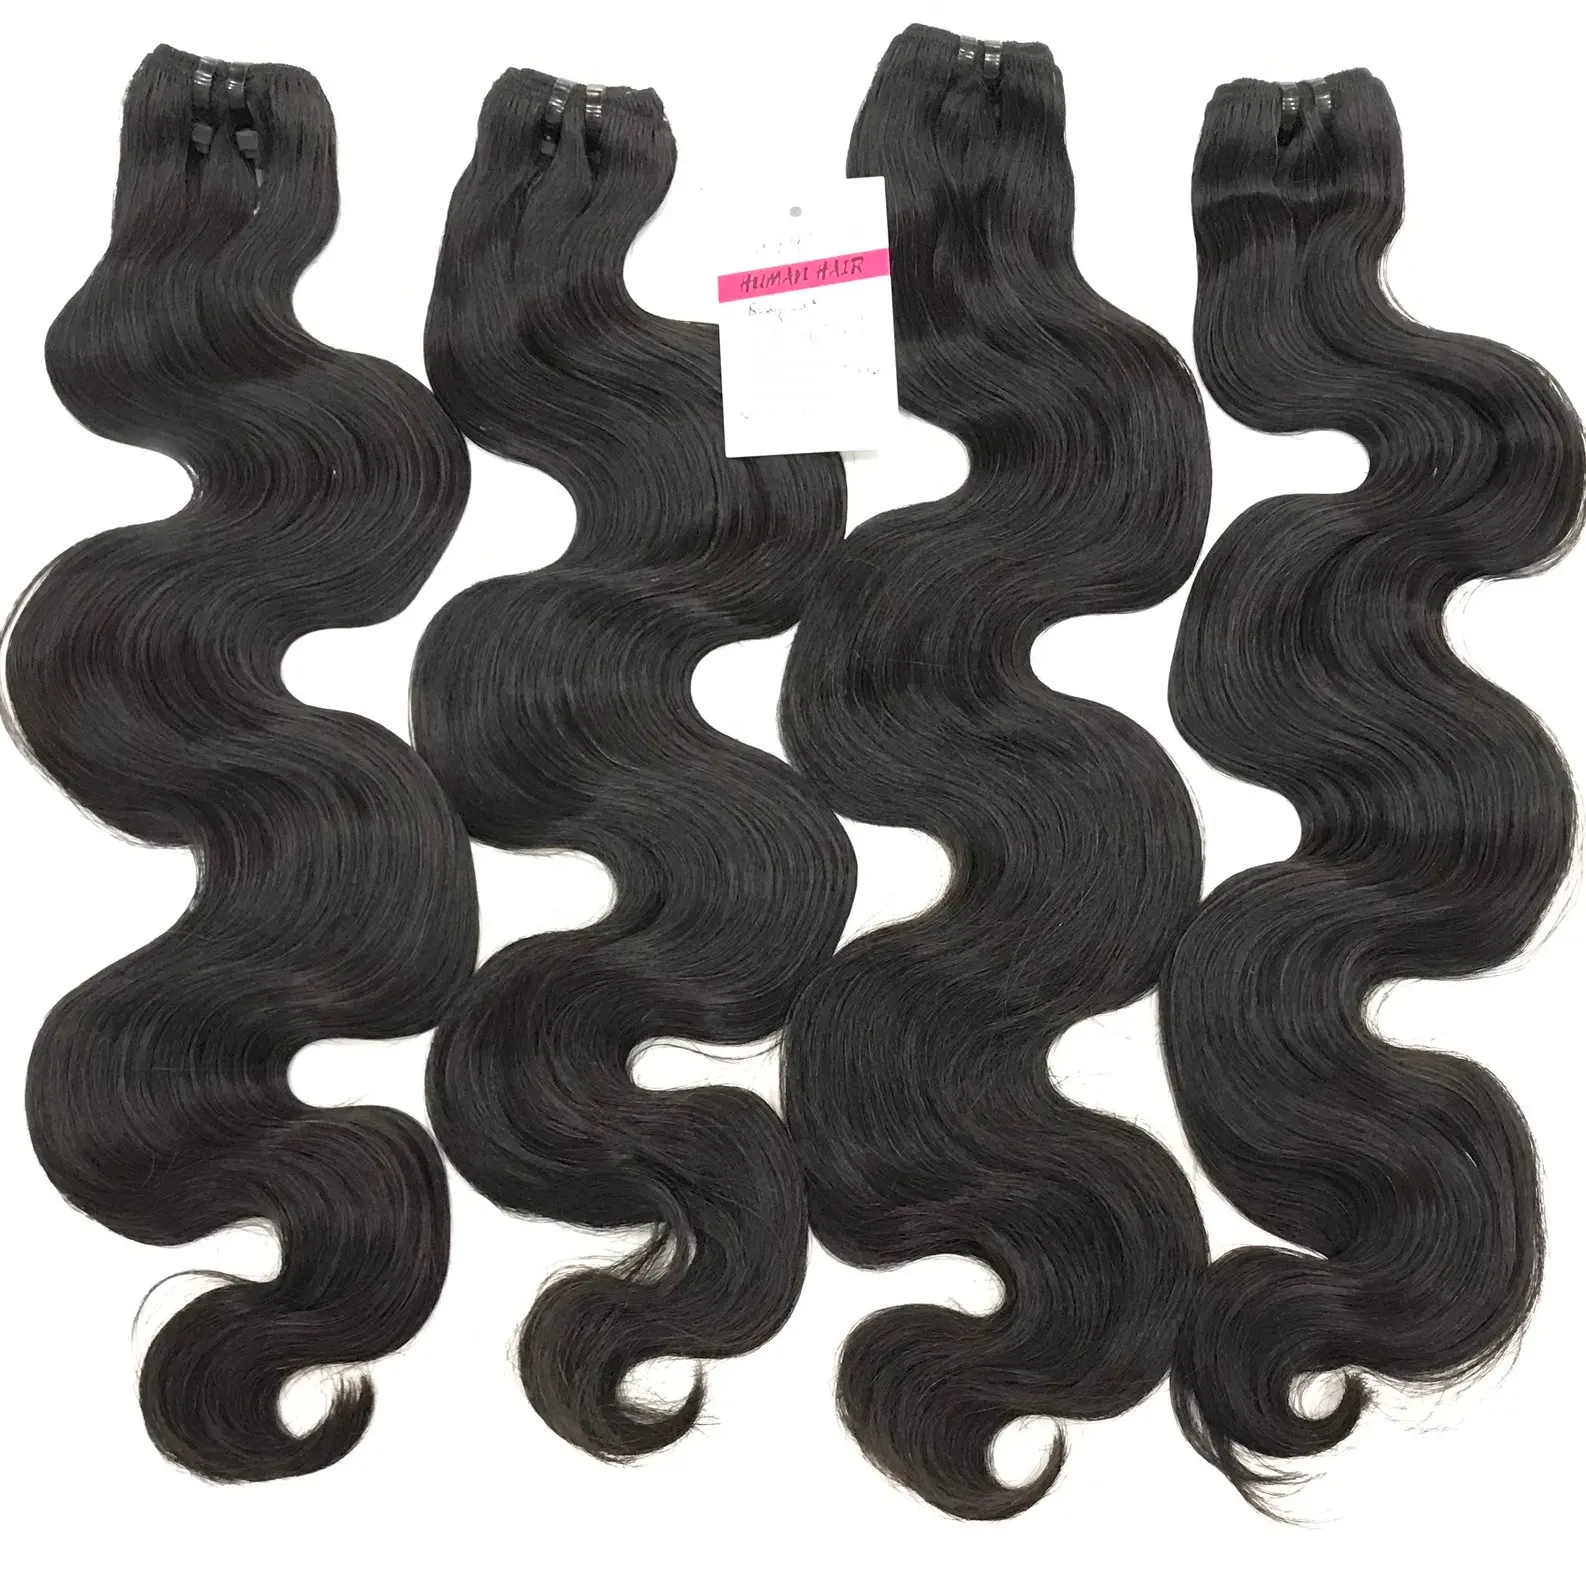 Cuticle Aligned Body Wave Unprocessed Natural Black Color 100% Brazilian Human Hair